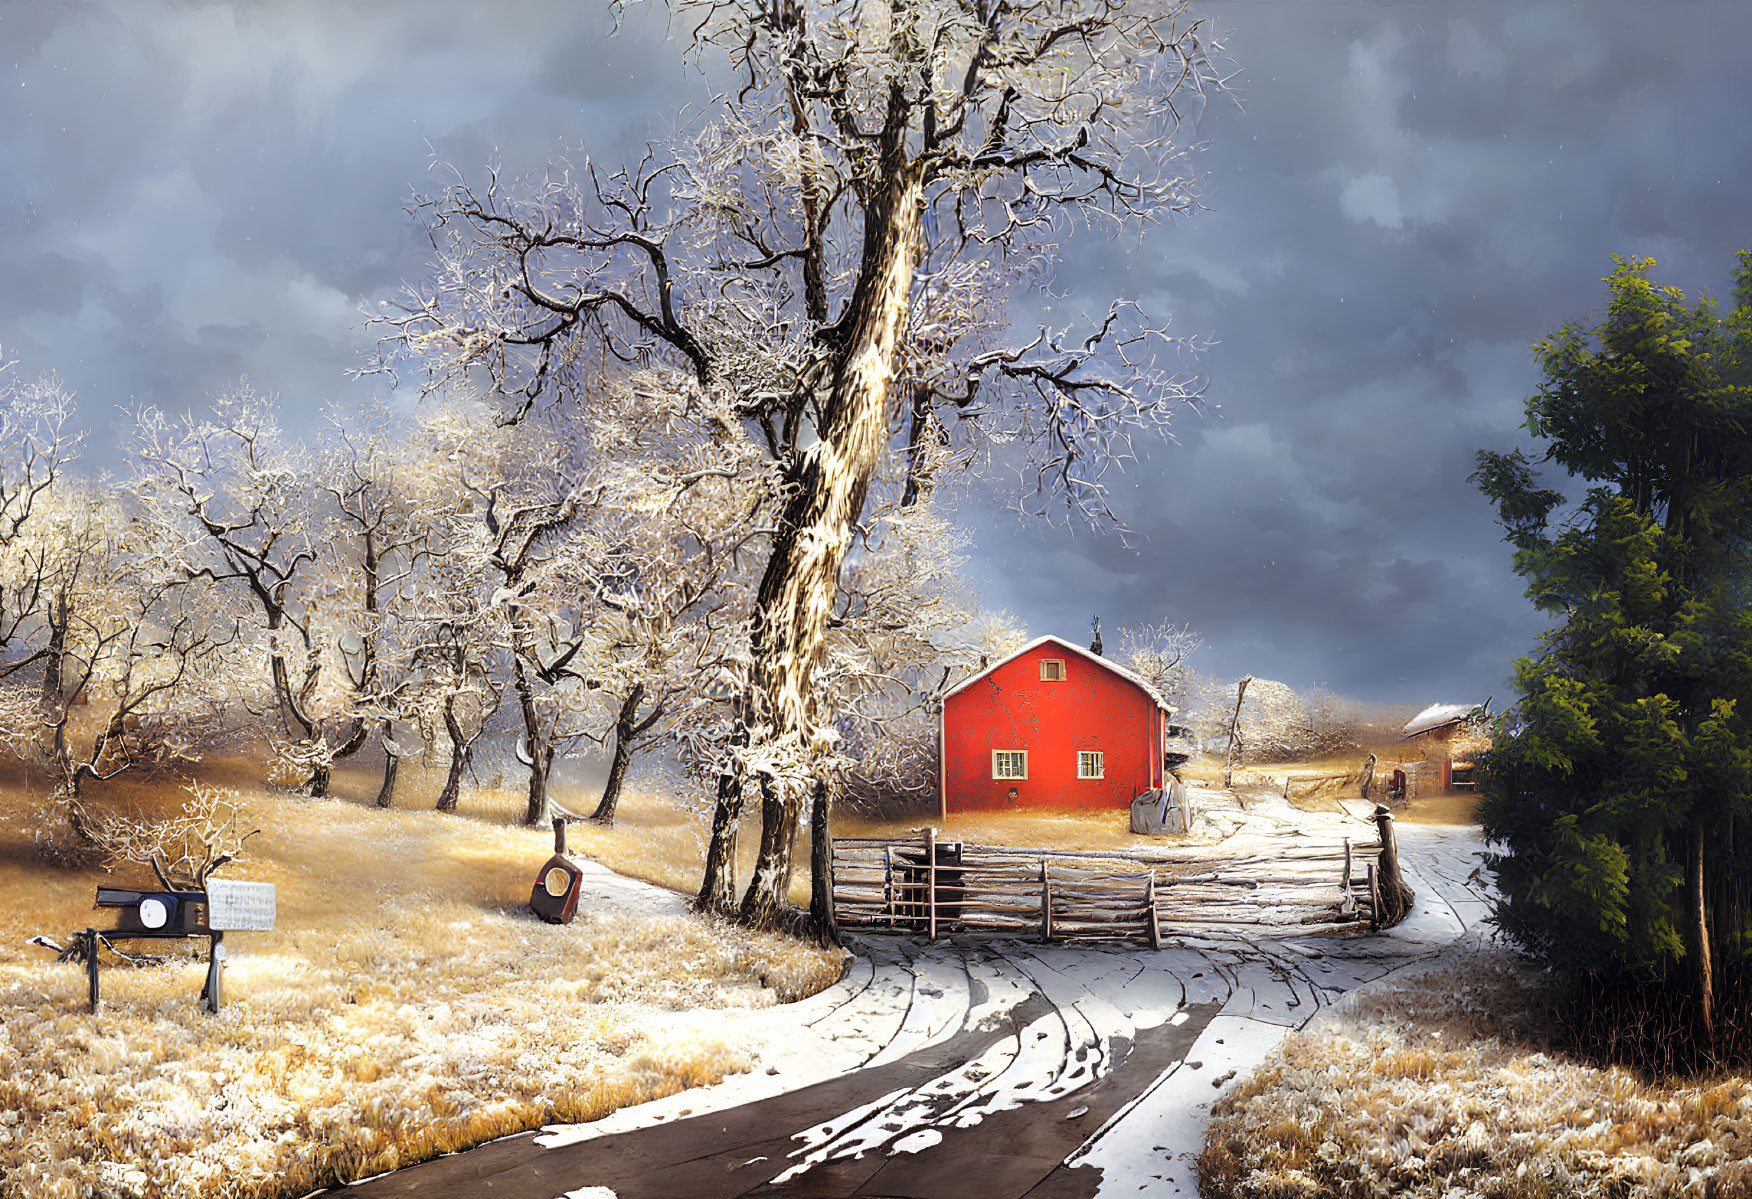 Snow-covered winter landscape with red barn, leafless trees, and clear sky